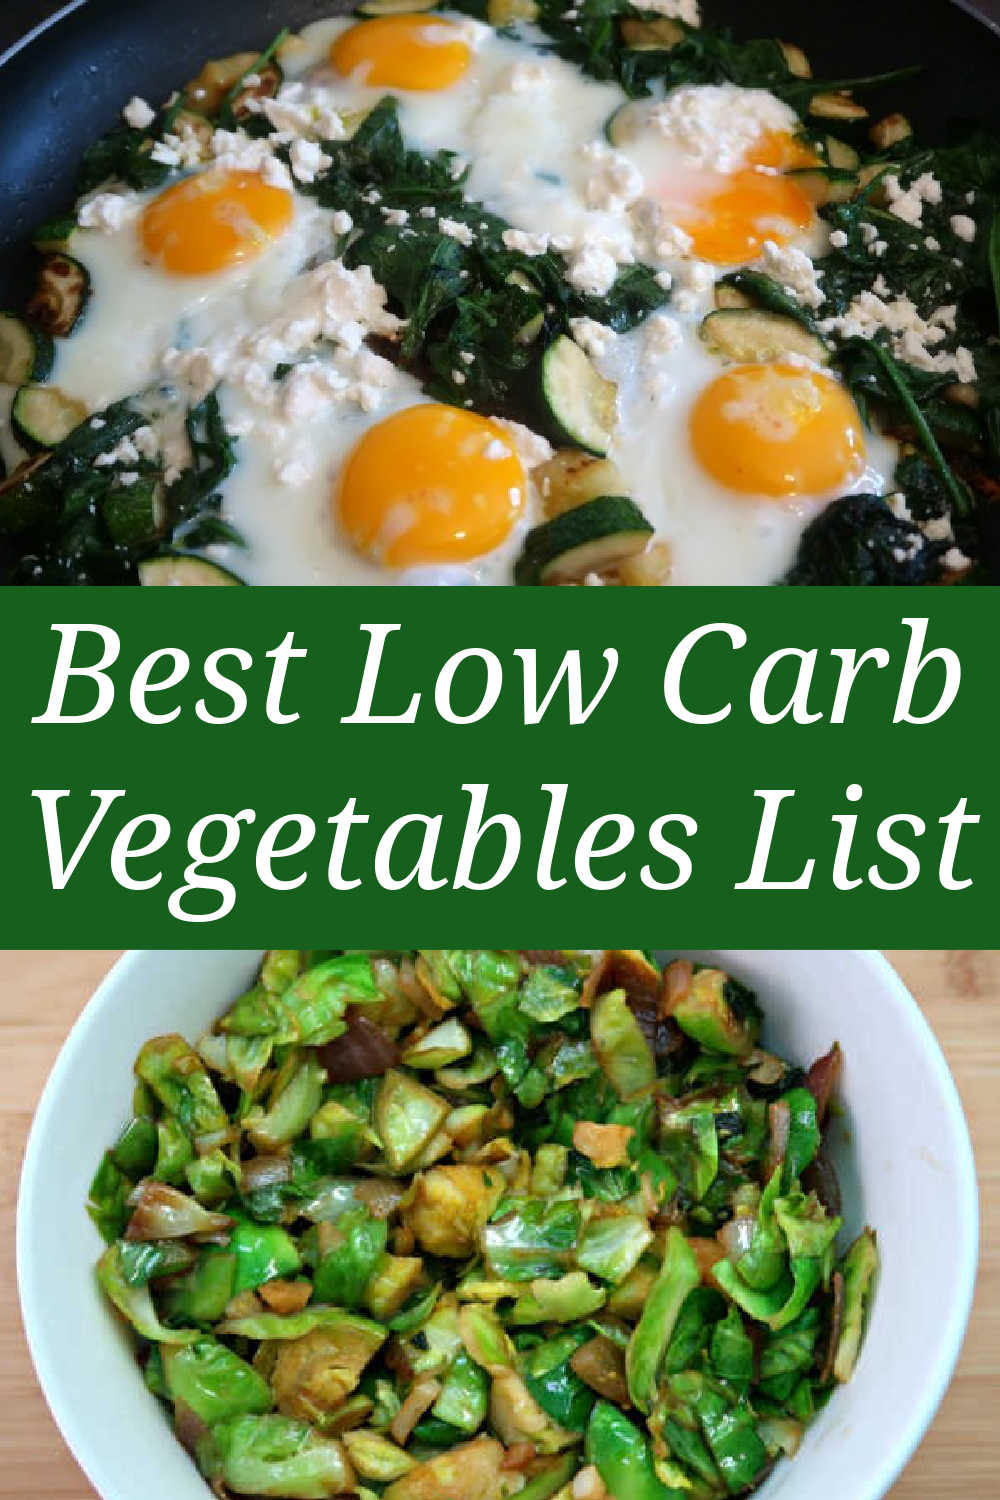 Best Low Carb Vegetables List – including the best keto diet friendly recipes and ideas for the veggies lowest carbs – and what to avoid.